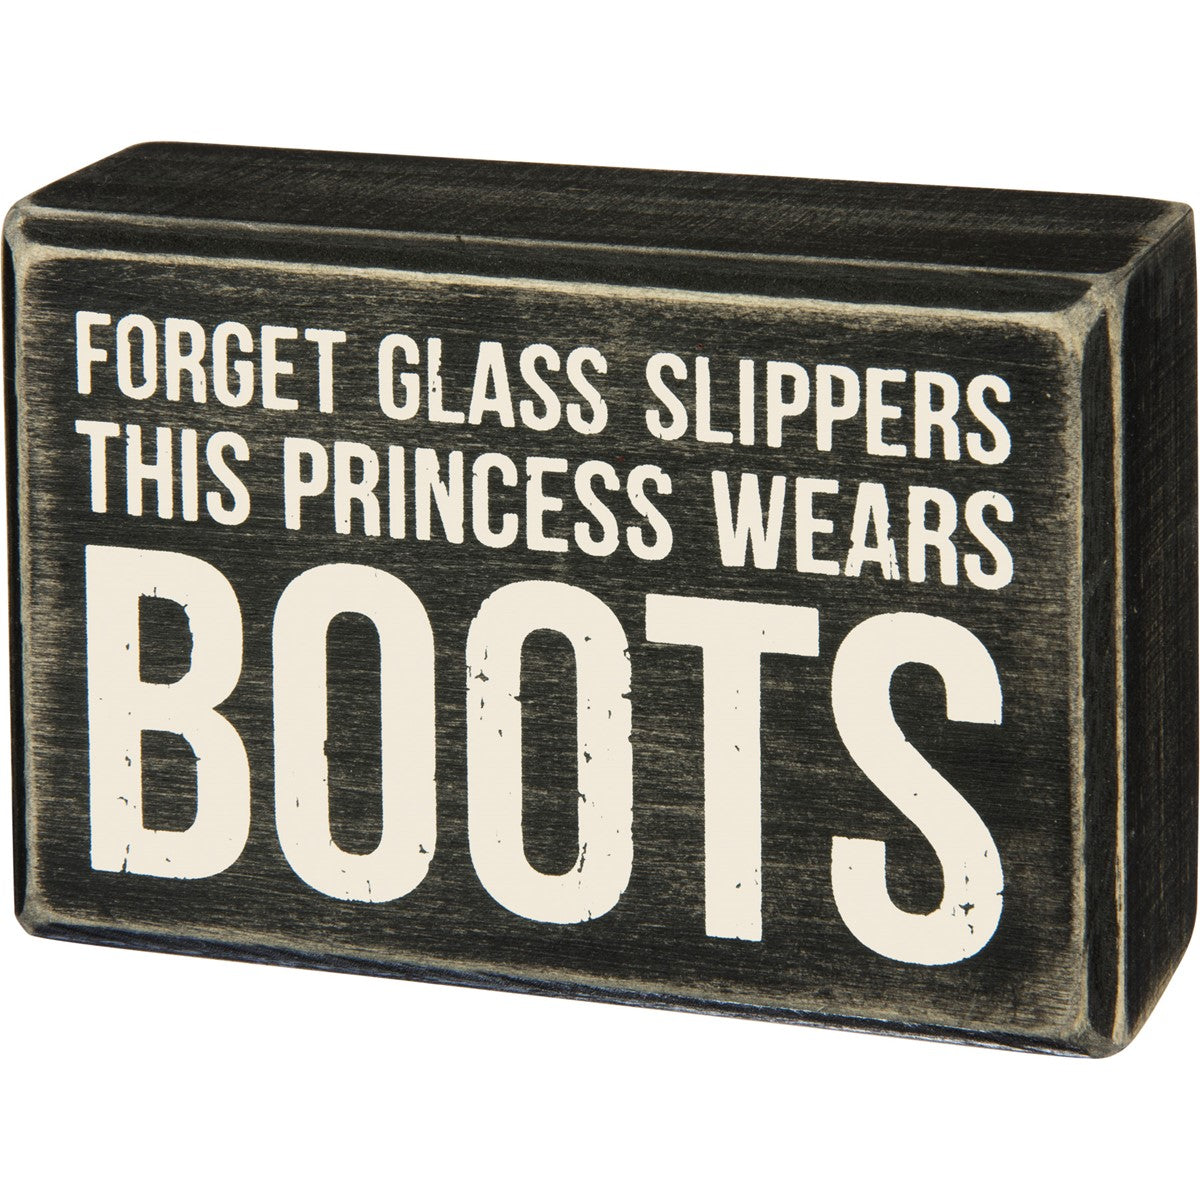 Forget Glass Slippers This Princess Wears Boots Mini Wood Box Sign